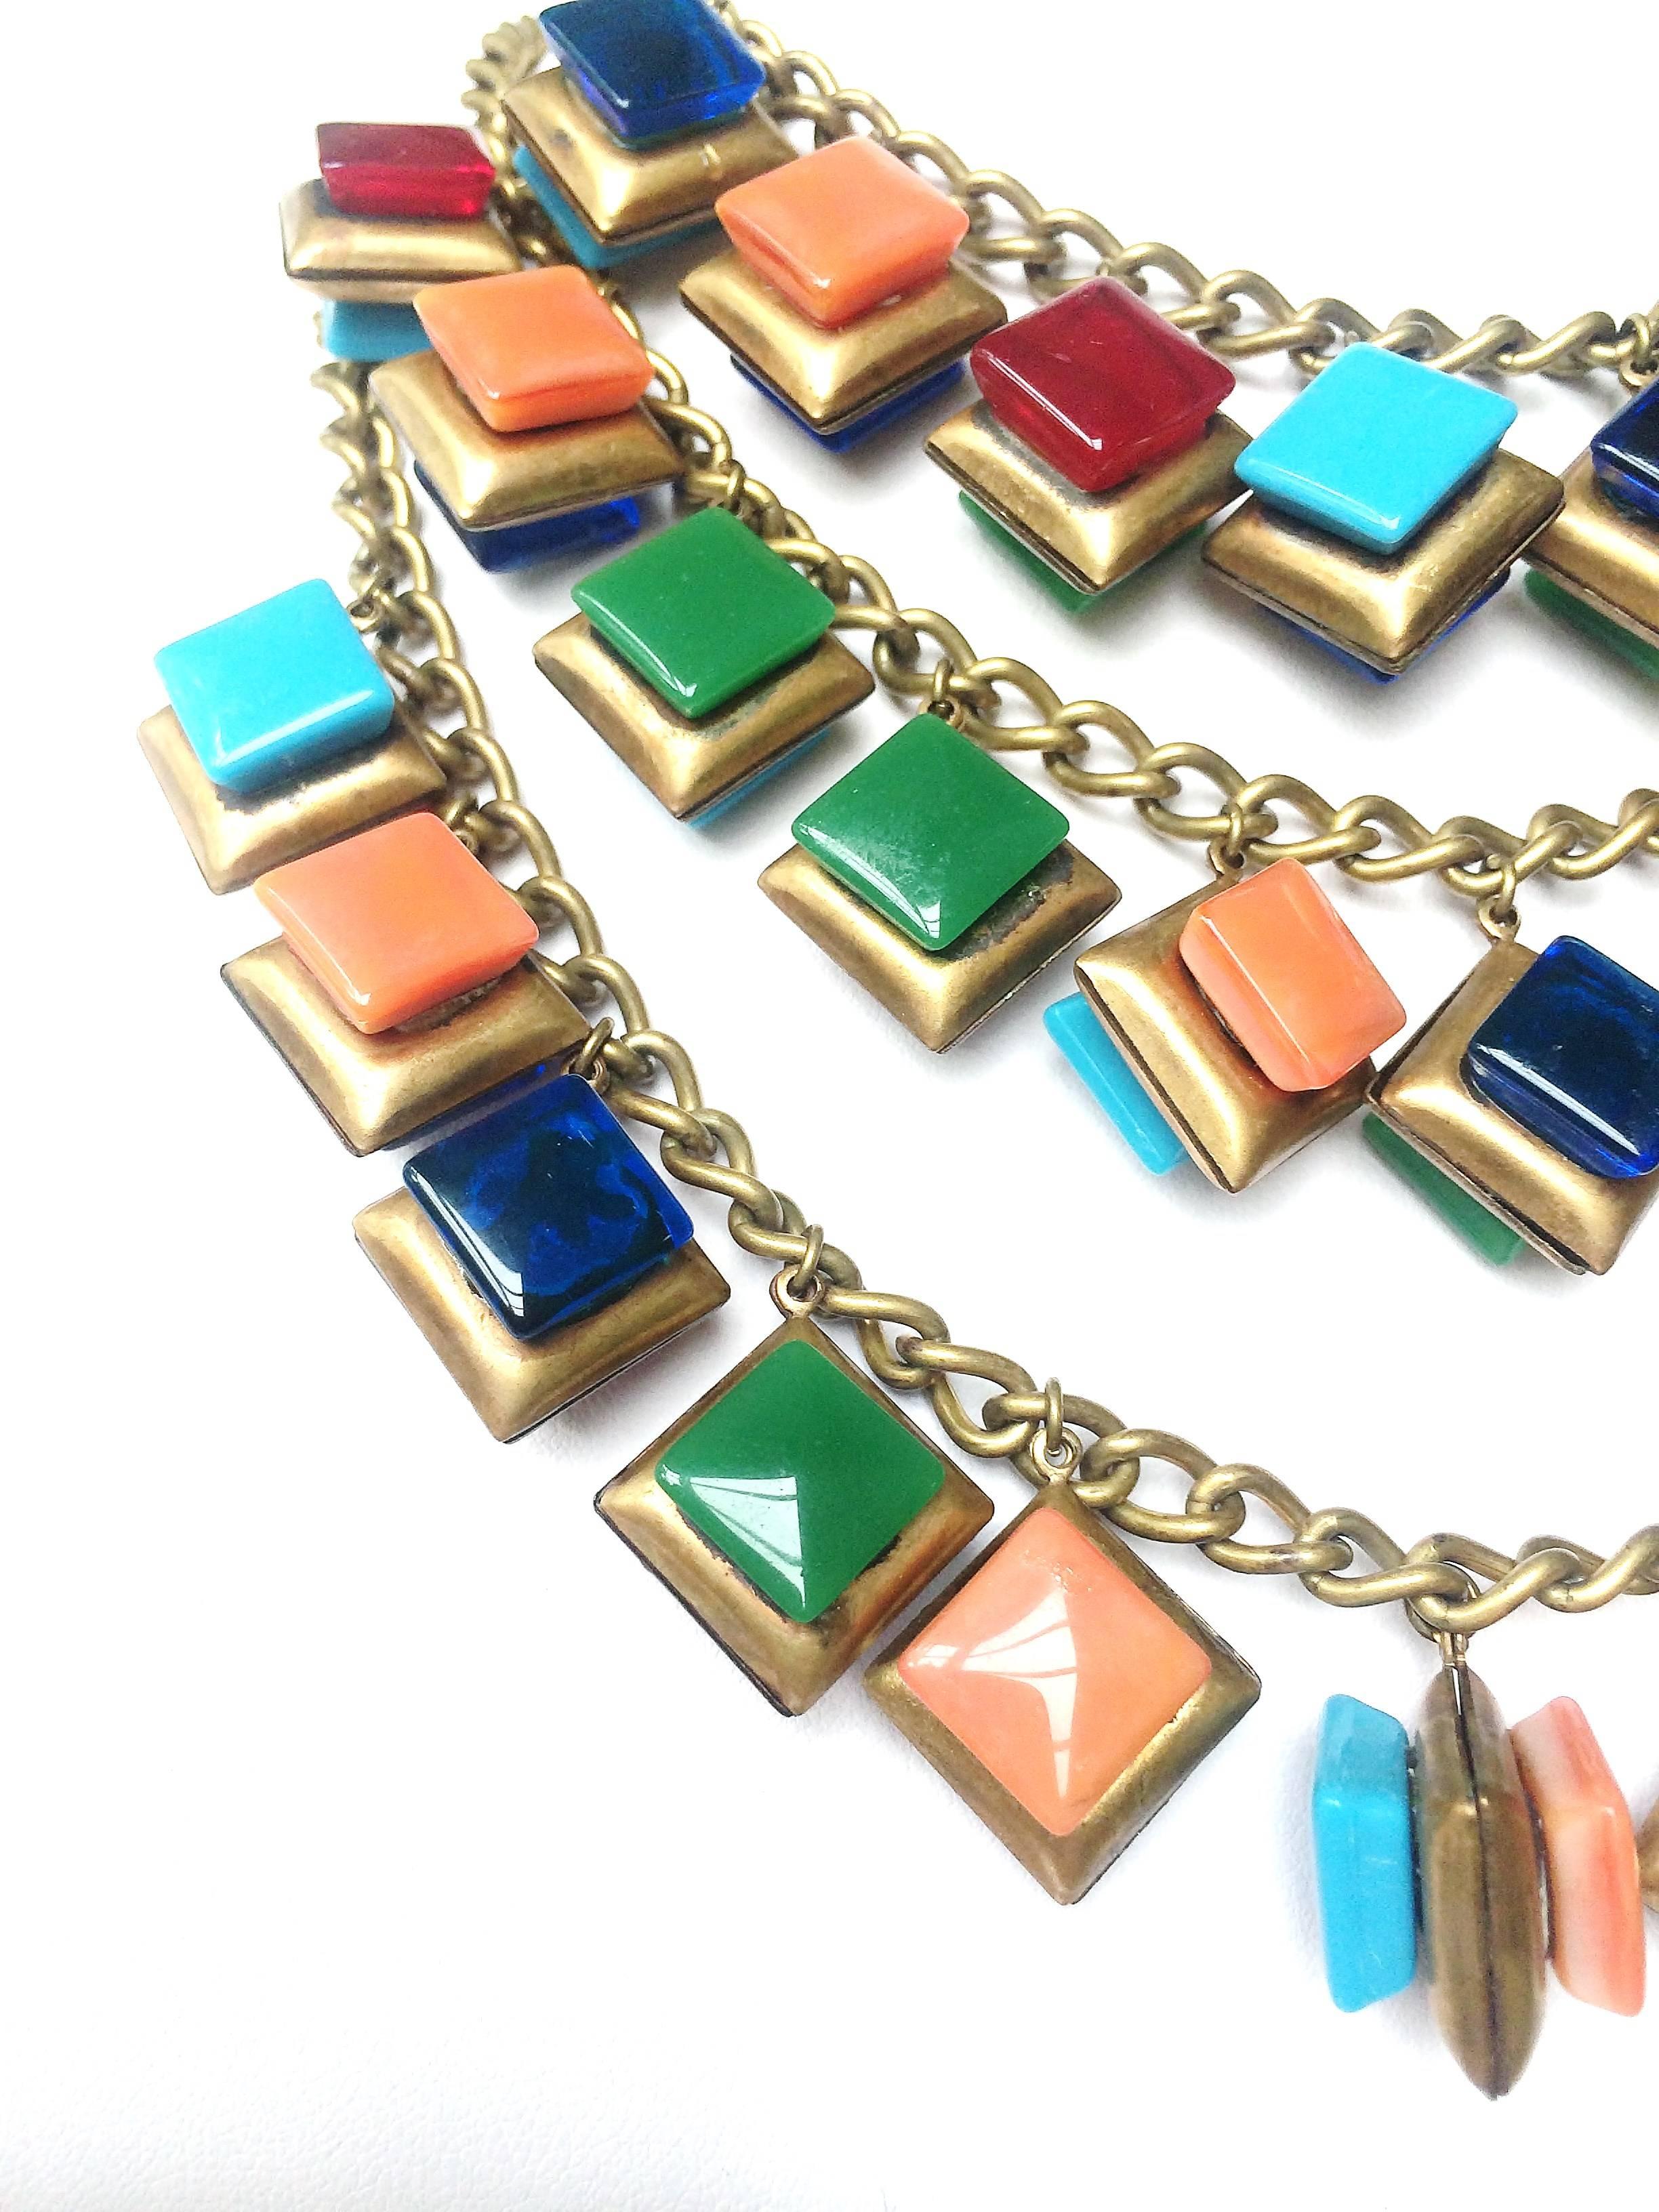 Unsigned - but utterly striking, and pleasurable -  a necklace of brass chains with brass 'cushion' charms suspended, each 'charm' embellished with a coloured square of glass, both opaque and clear, in an assortment of hues.This dramatic piece has